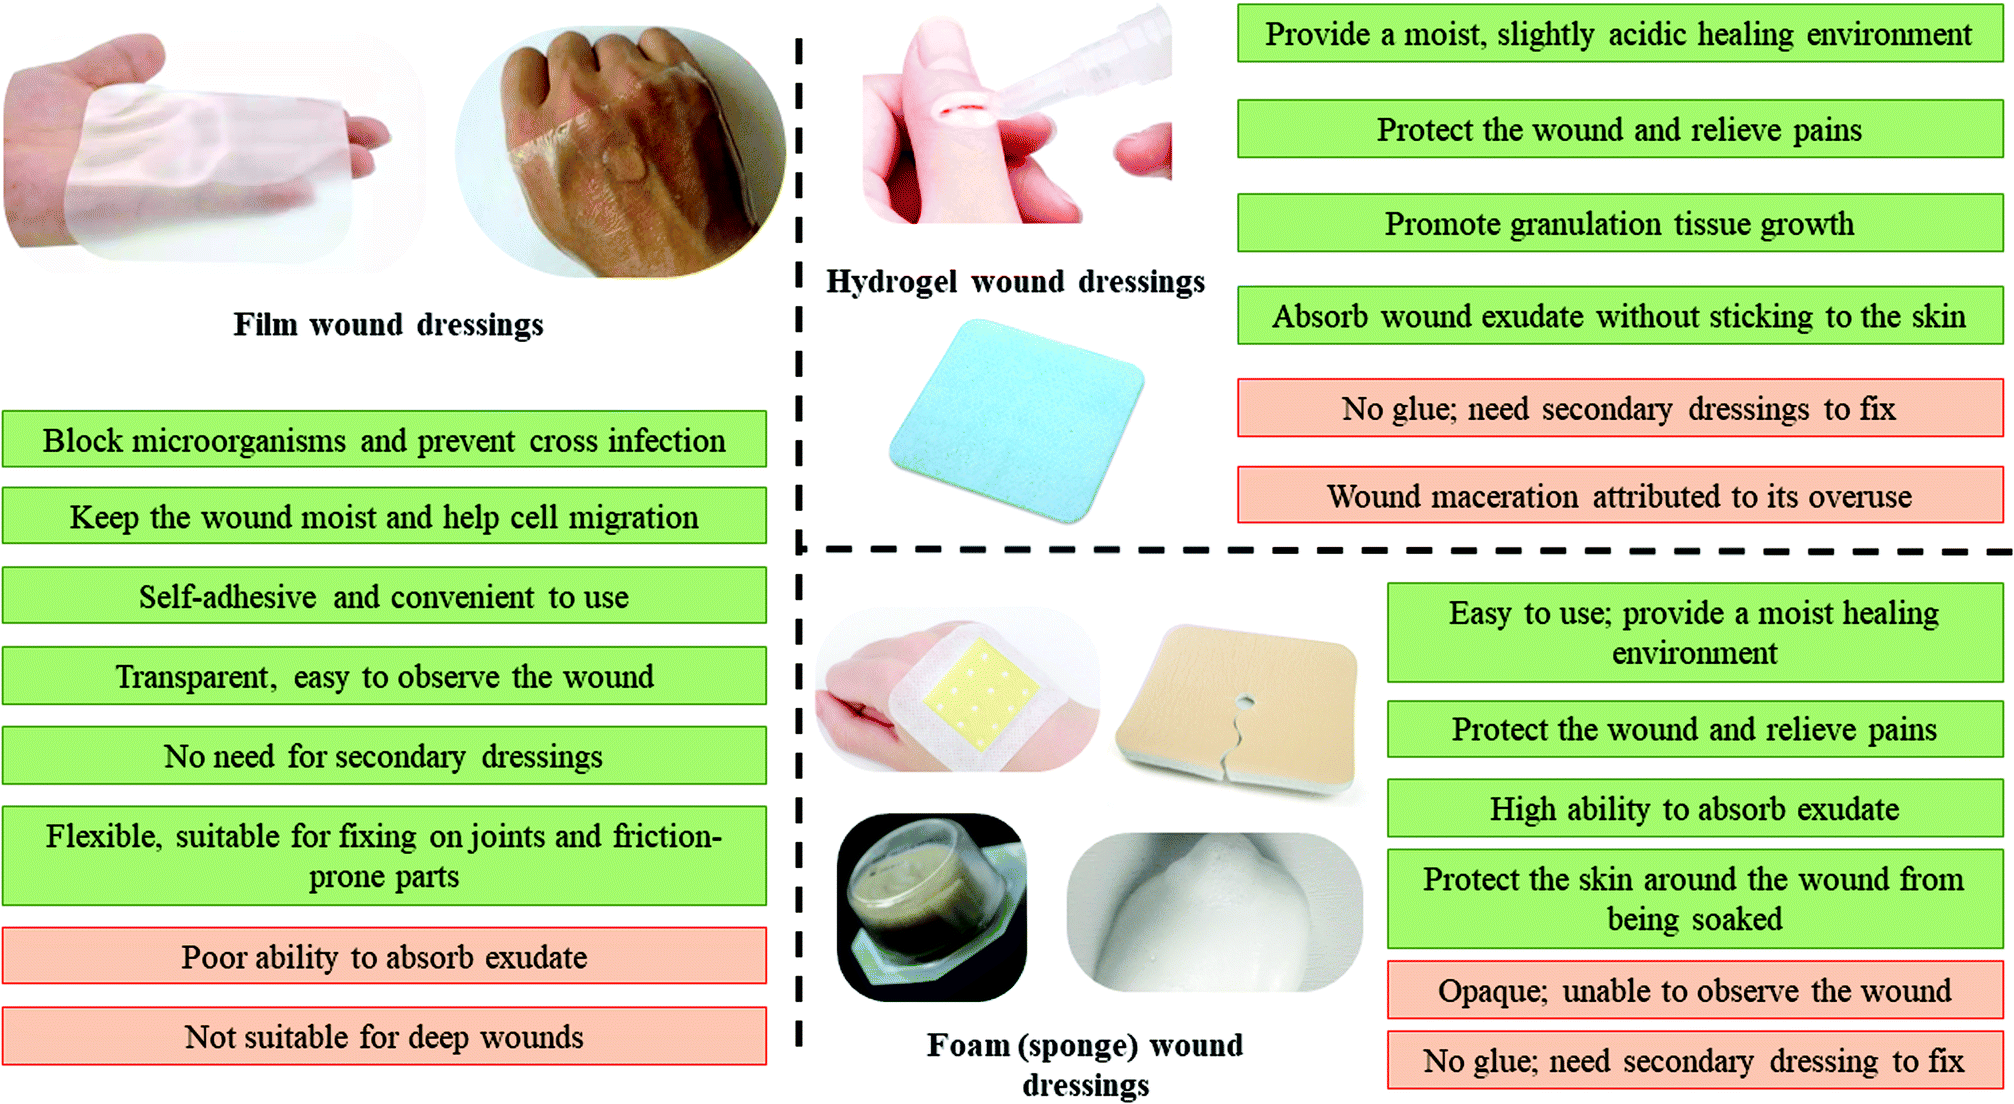 Marine polysaccharides: green and recyclable resources as wound dressings -  Materials Chemistry Frontiers (RSC Publishing) DOI:10.1039/D1QM00561H